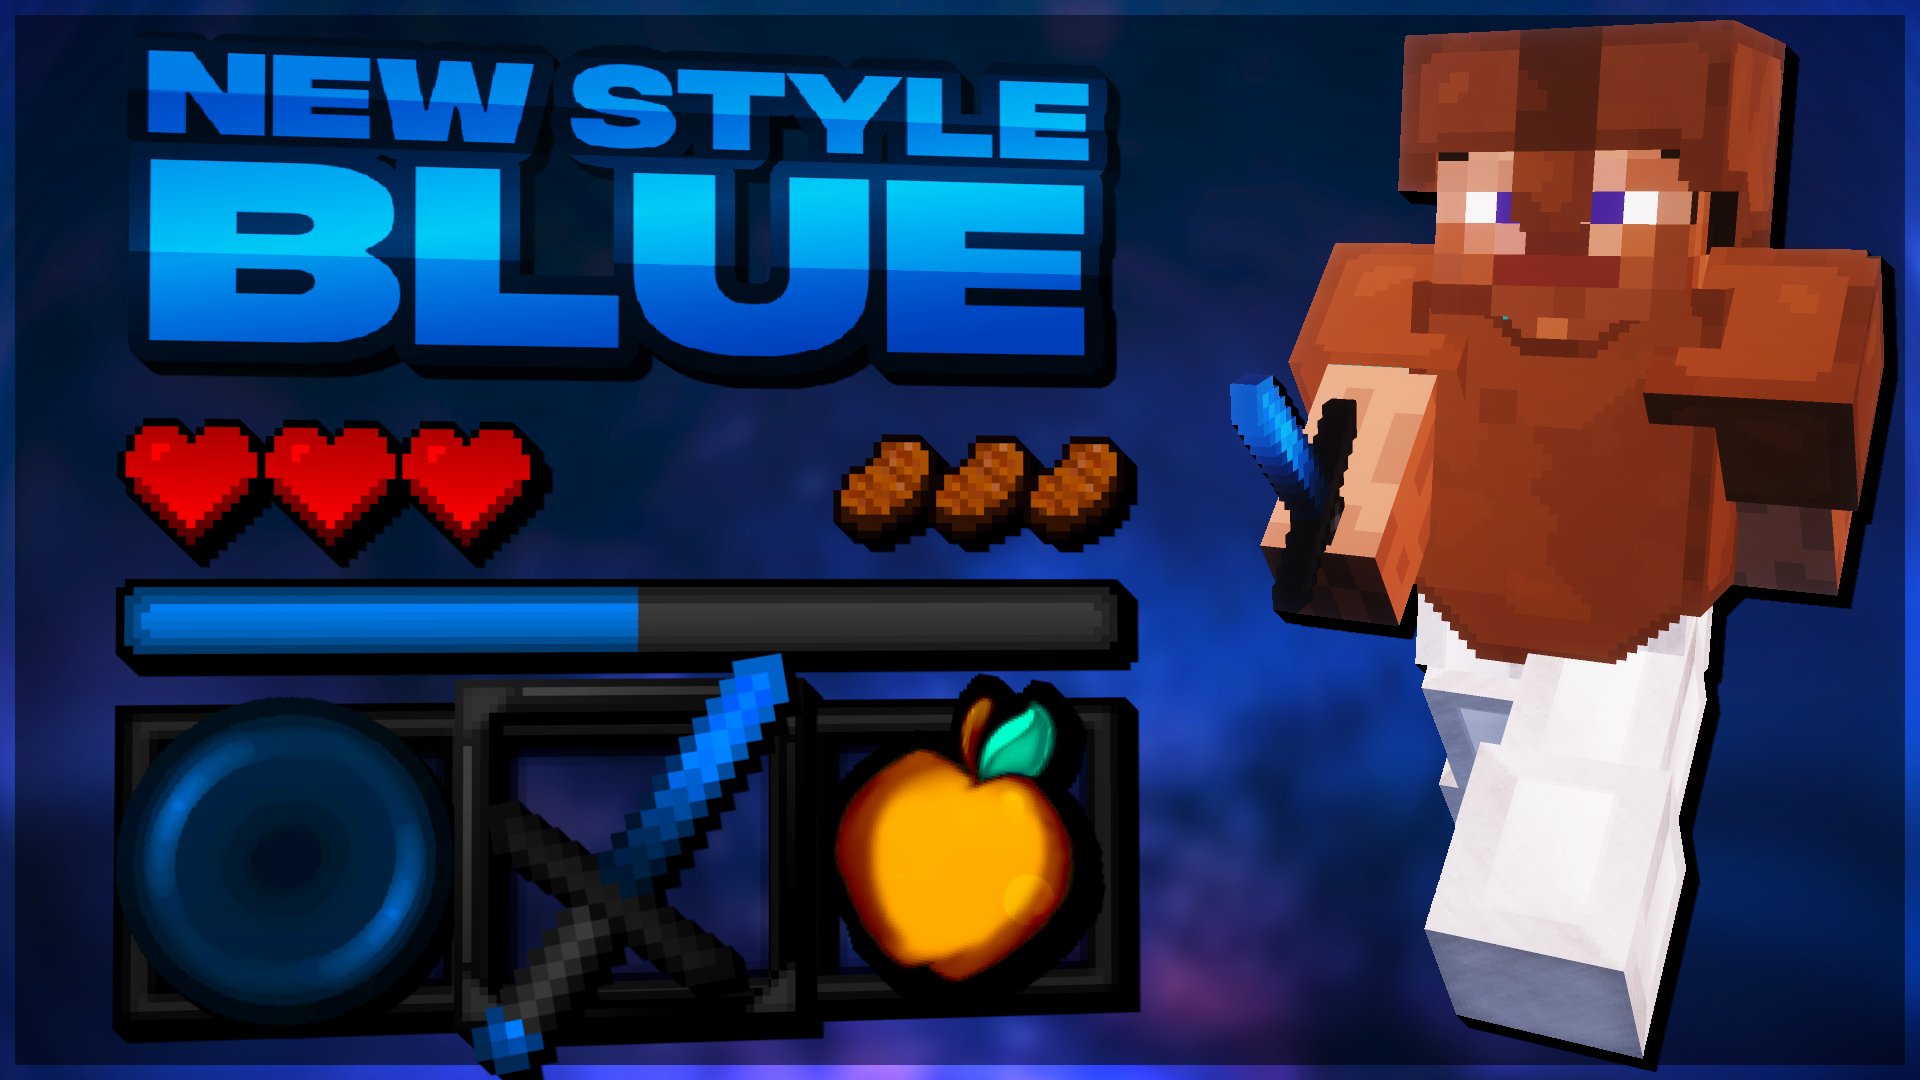 New Style Blue's cover